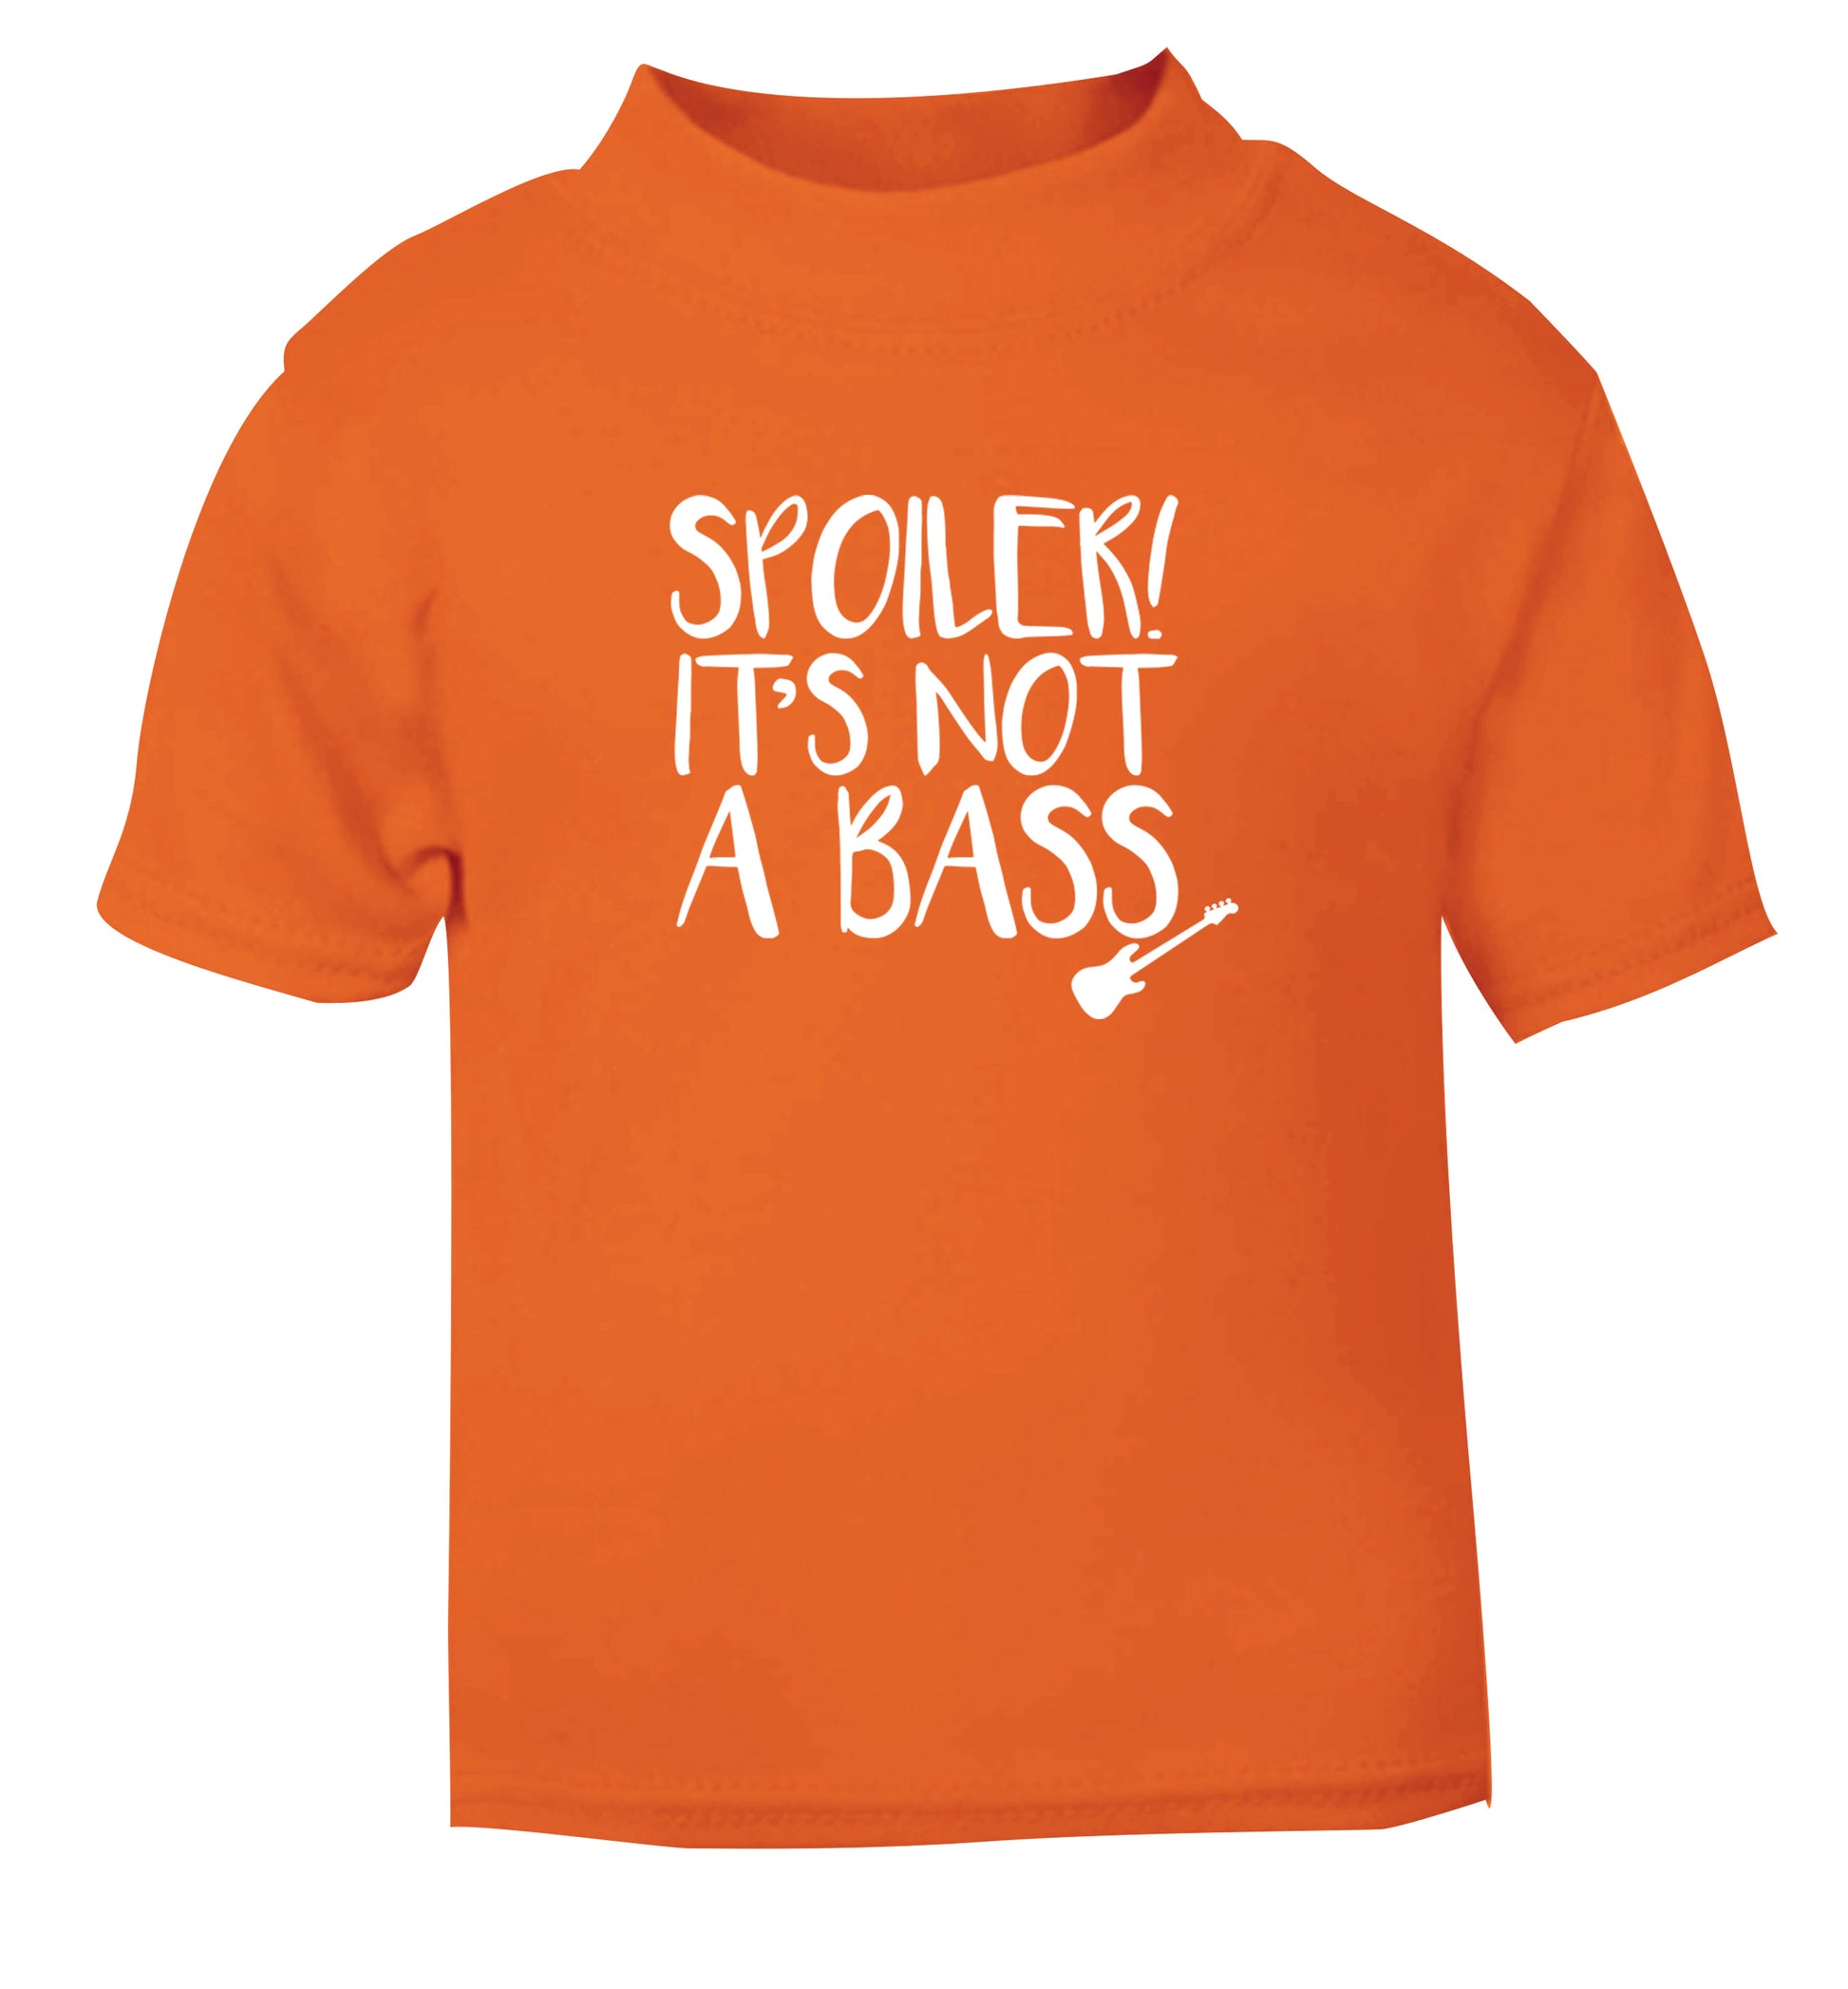 Spoiler it's not a bass orange Baby Toddler Tshirt 2 Years